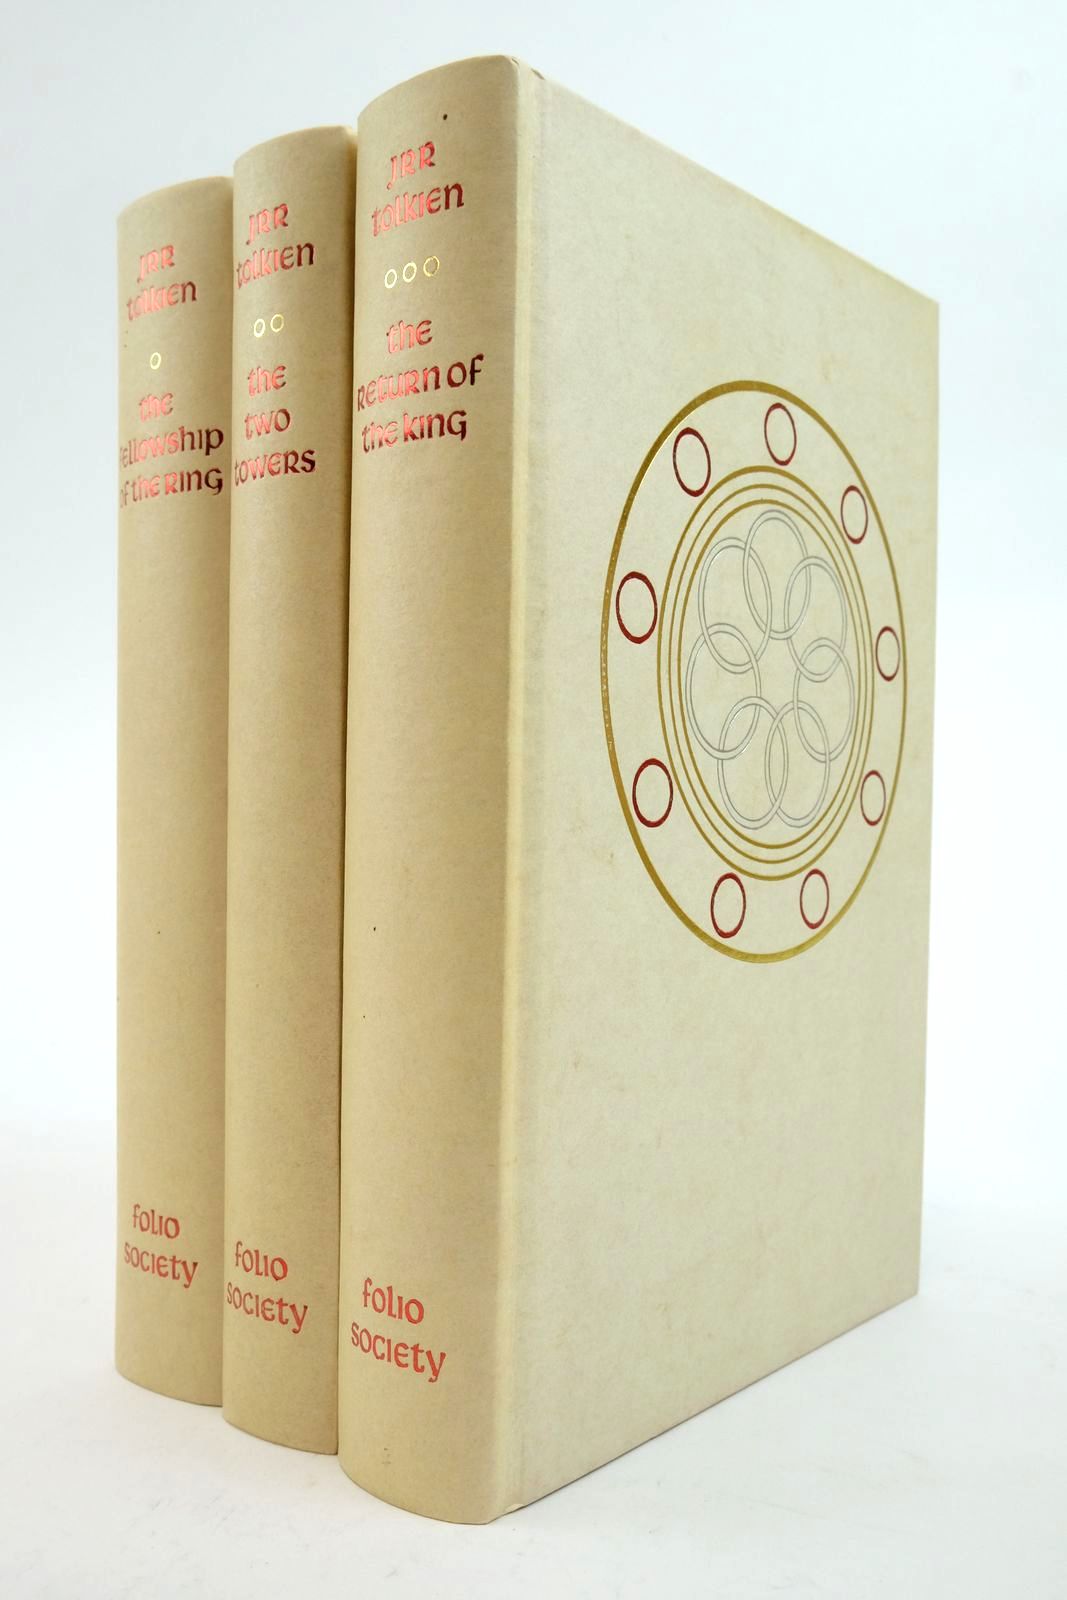 Photo of THE LORD OF THE RINGS (3 VOLUMES) written by Tolkien, J.R.R. illustrated by Grathmer, Ingahild
Fraser, Eric published by Folio Society (STOCK CODE: 2138771)  for sale by Stella & Rose's Books